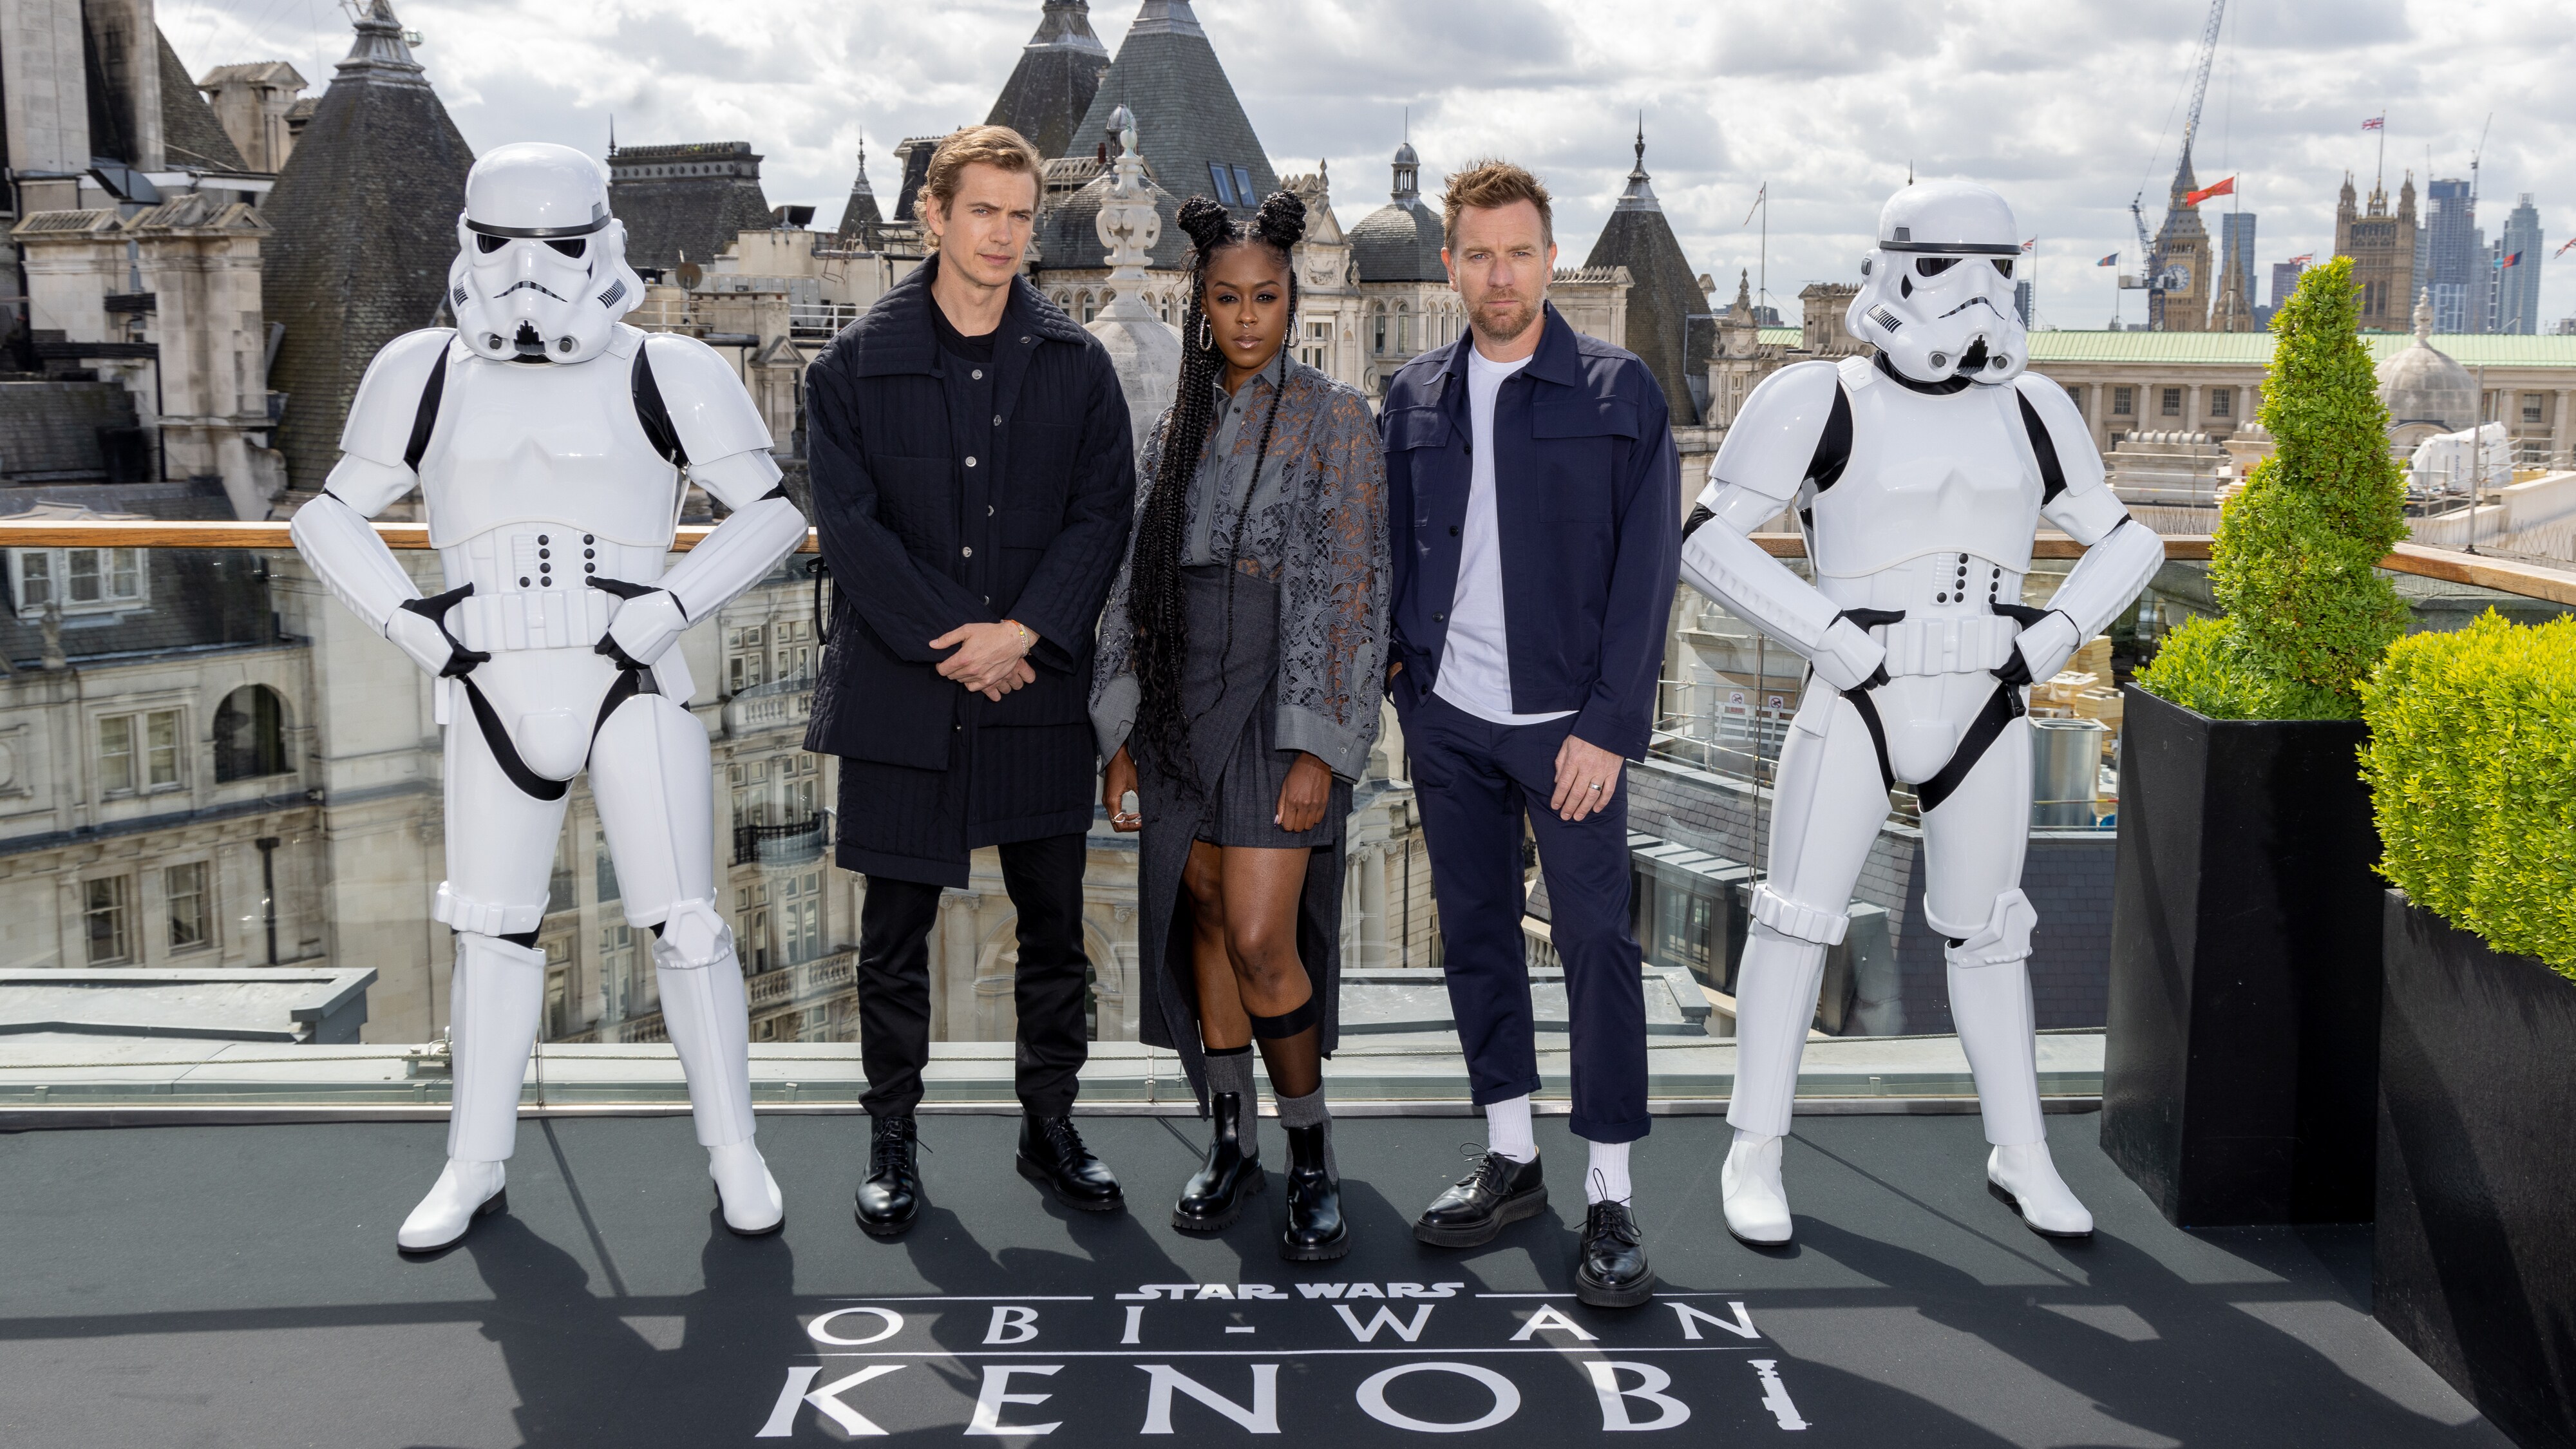 LONDON, ENGLAND - MAY 12: (L to R) Hayden Christensen, Moses Ingram and Ewan McGregor attend the photocall for the new Disney+ limited series "Obi Wan Kenobi" at the Corinthia Hotel on May 12, 2022 in London, England. Obi-Wan Kenobi will be exclusively available on Disney+ from May 27. (Photo by StillMoving.net for Disney)